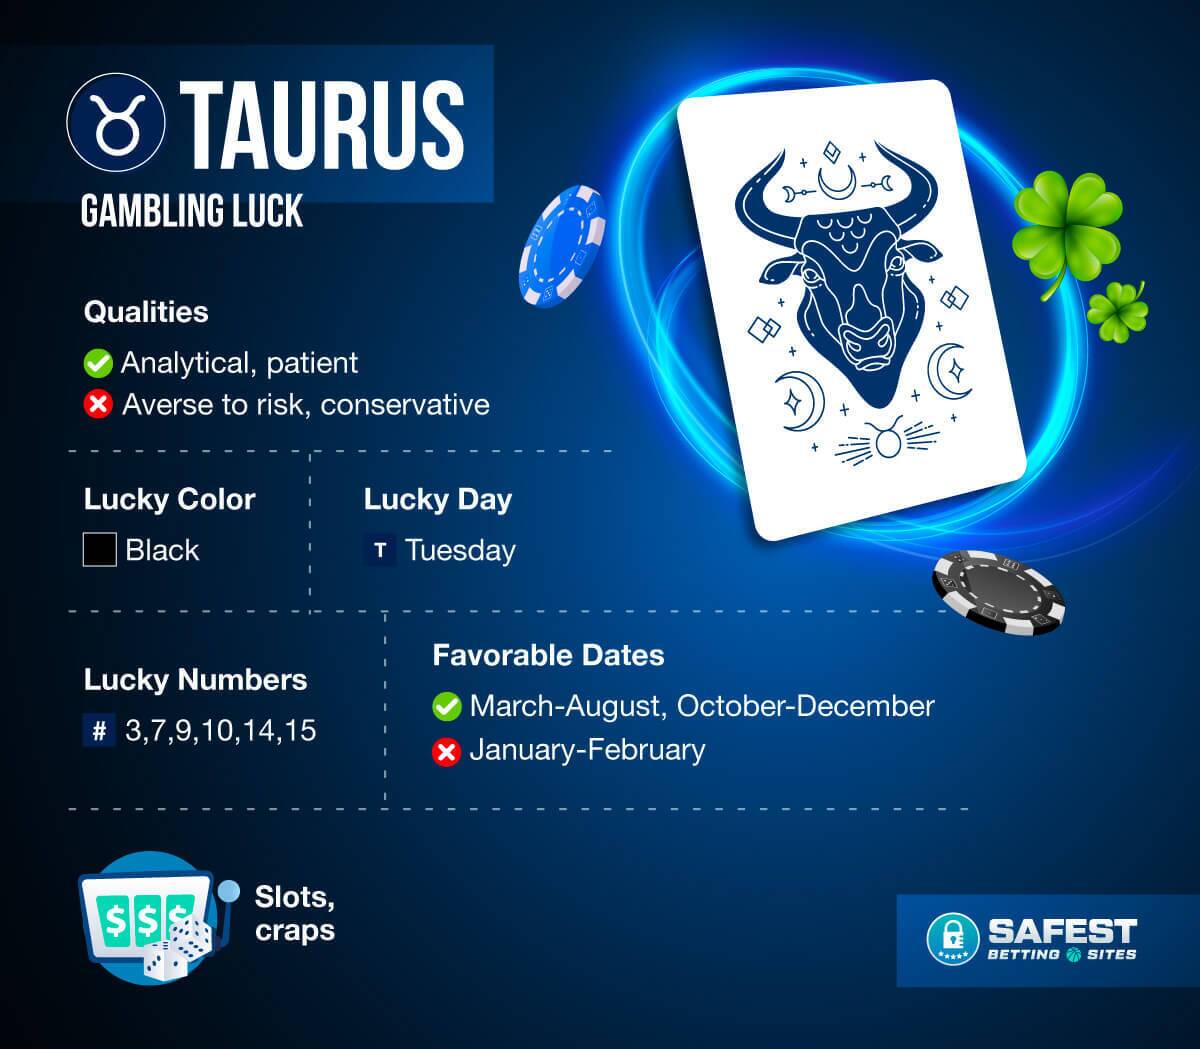 Is Today My Lucky Day to Gamble? Your Gambling Horoscope